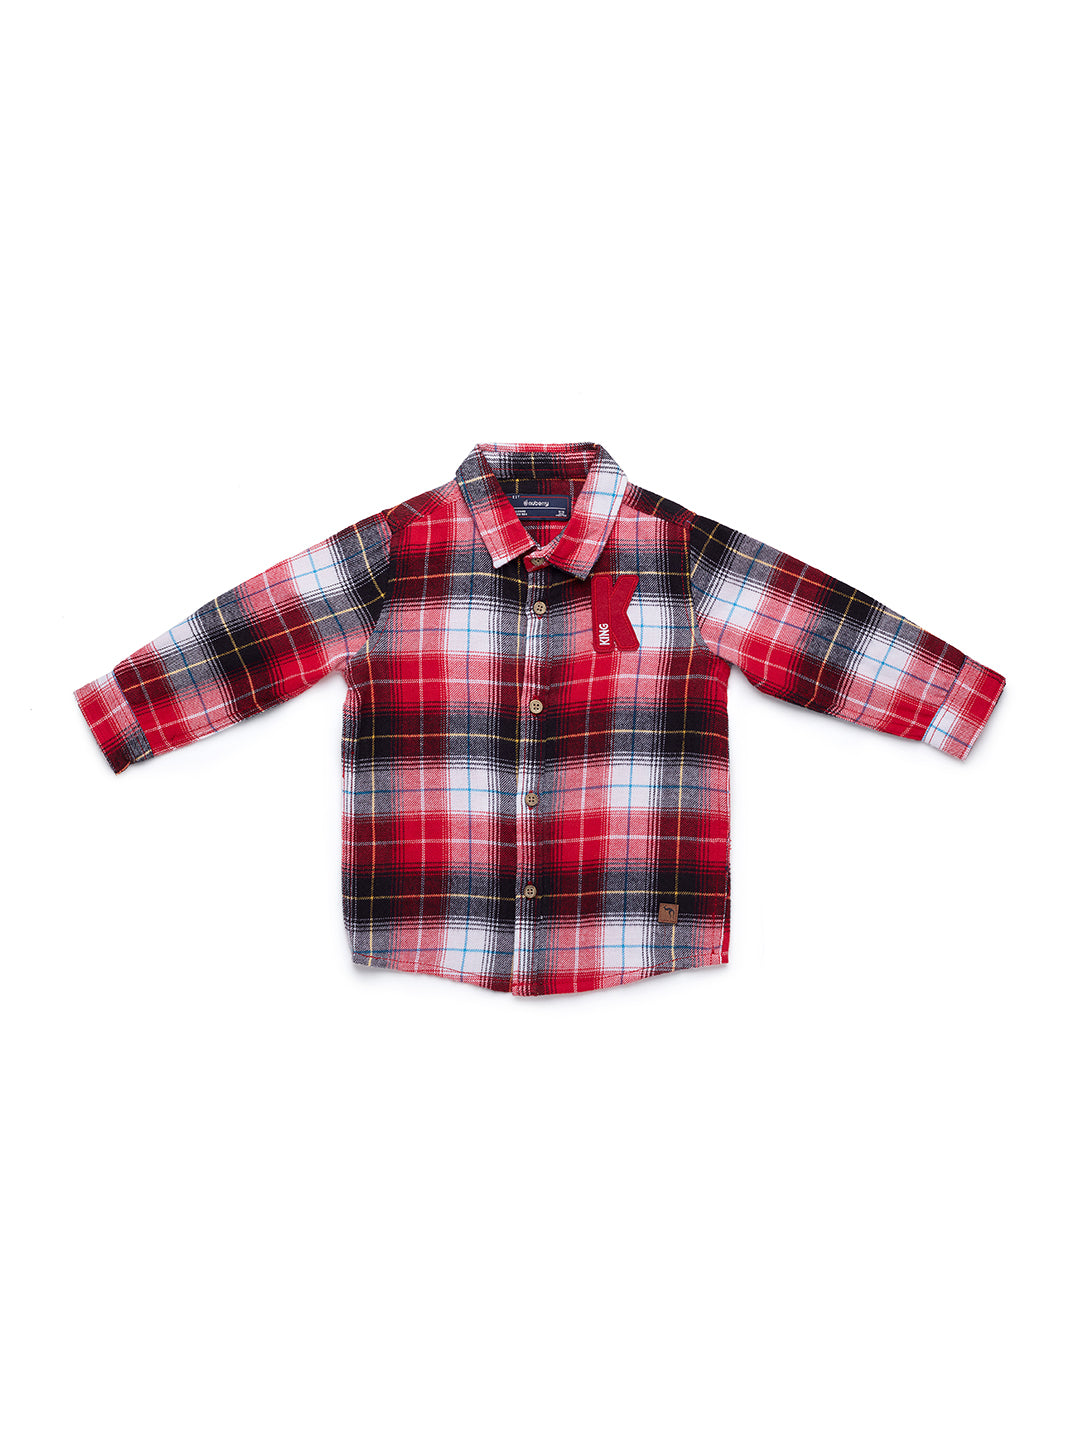 Nuberry Boys Full Sleeve Red and White Checked Shirt